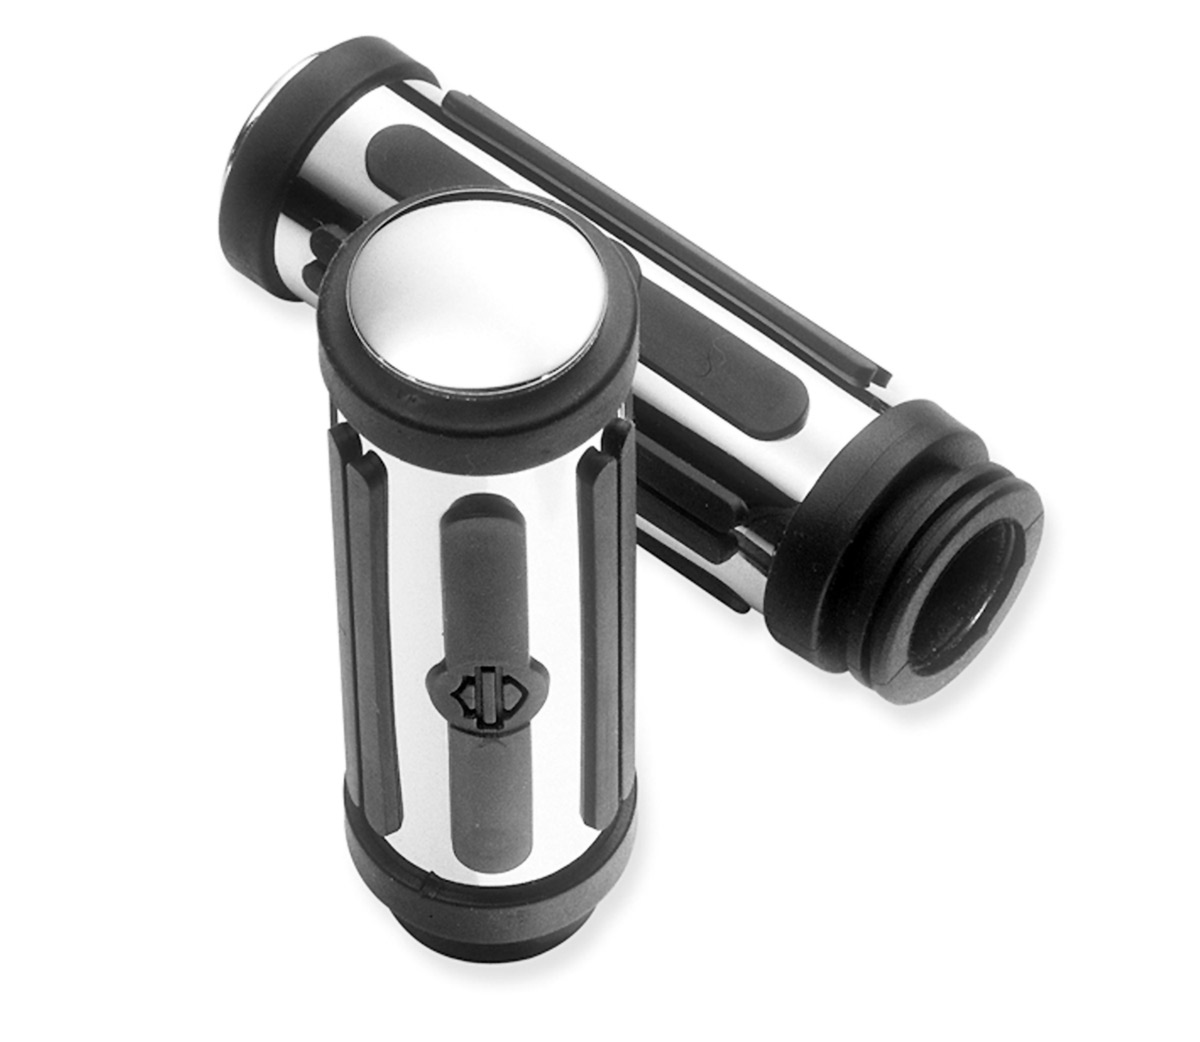 56263 96a H D Chrome Rubber Hand Grips Large For H D 96 Later